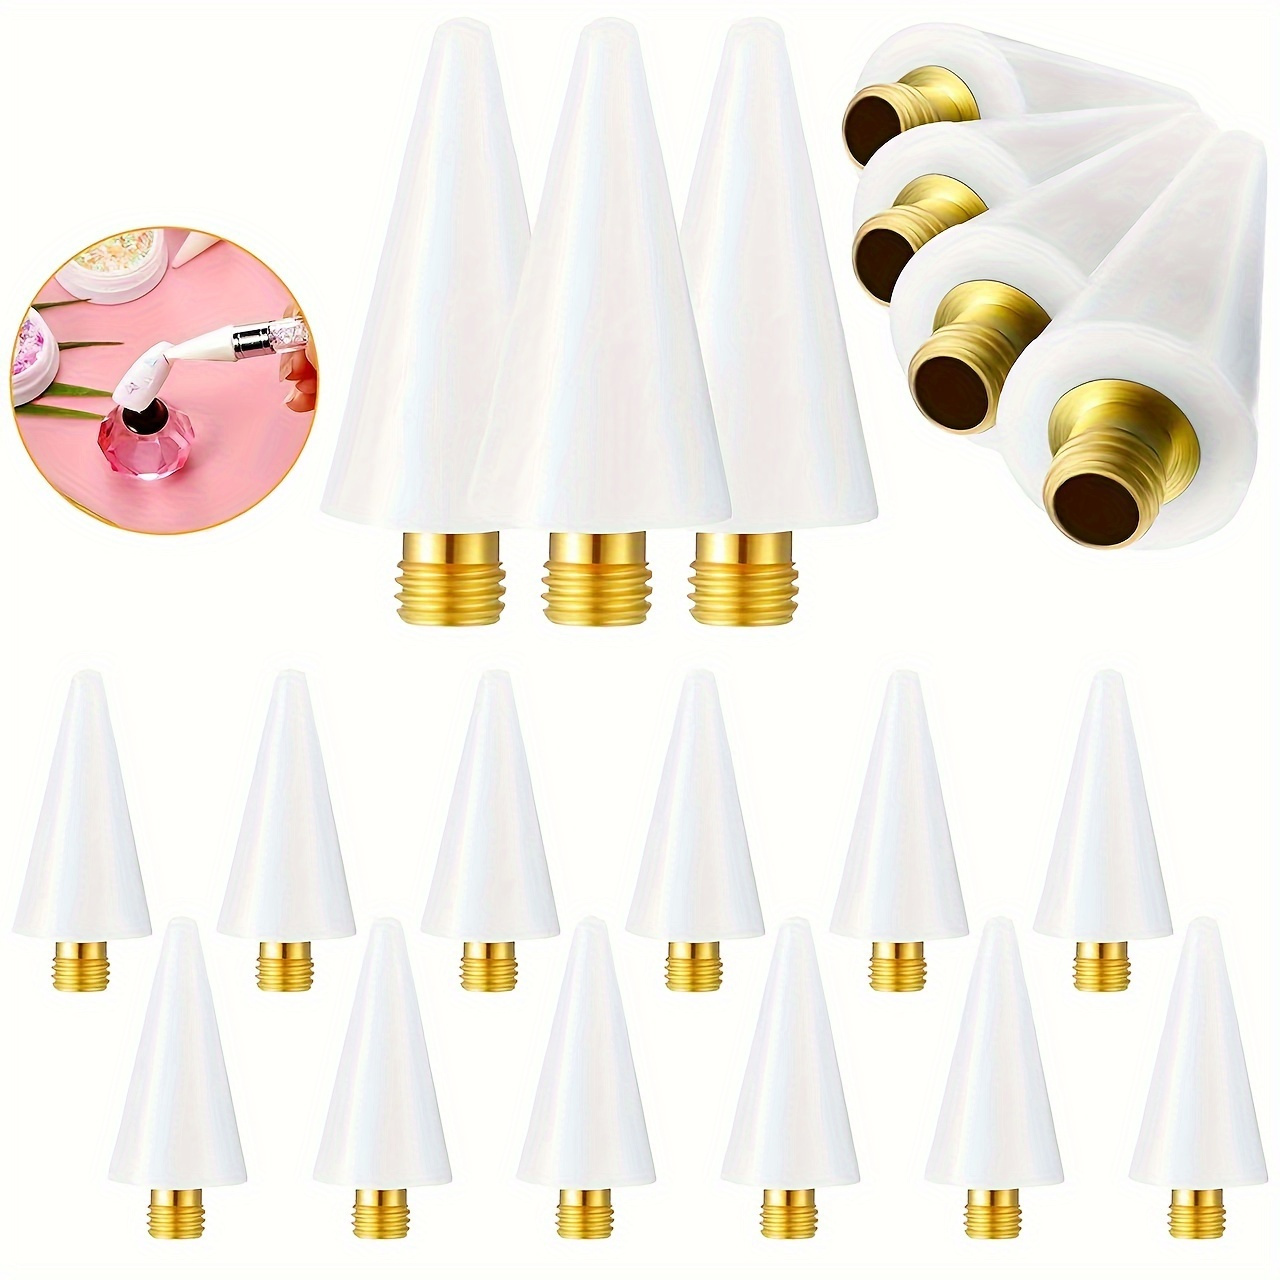 

Rhinestone Picker Wax Pen Replacement Heads 10pcs - Double-ended Design With Sticky Drill Release For Nail Art, Jewelry Making & Decoration Tools, Odorless, Suitable For Hands, Feet & Nails Care